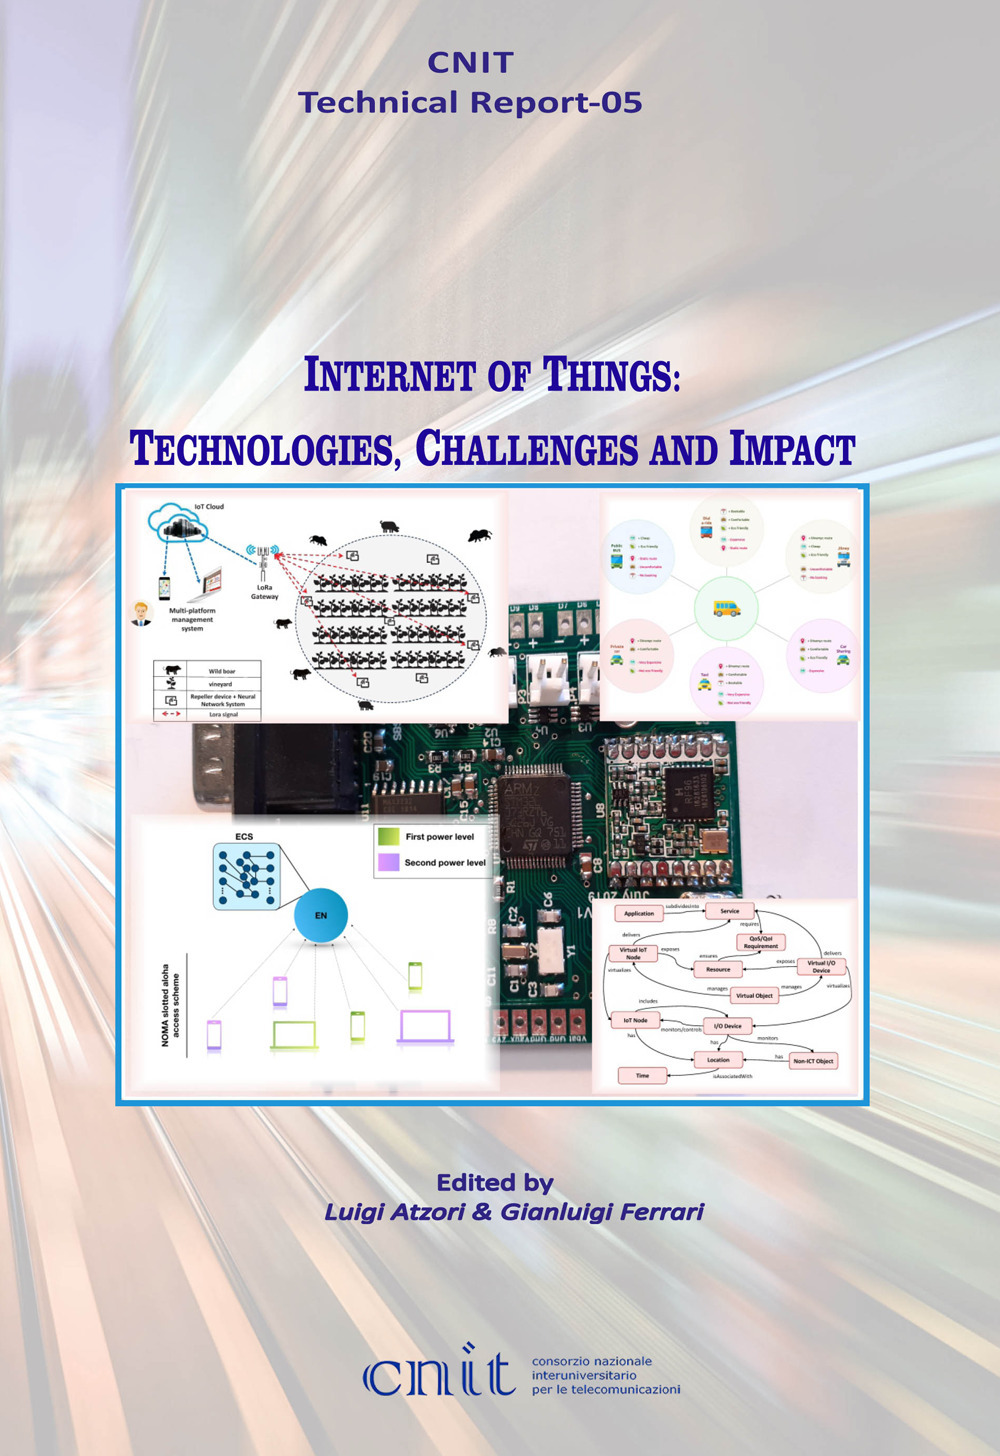 Internet of things: technologies, challenges and impact